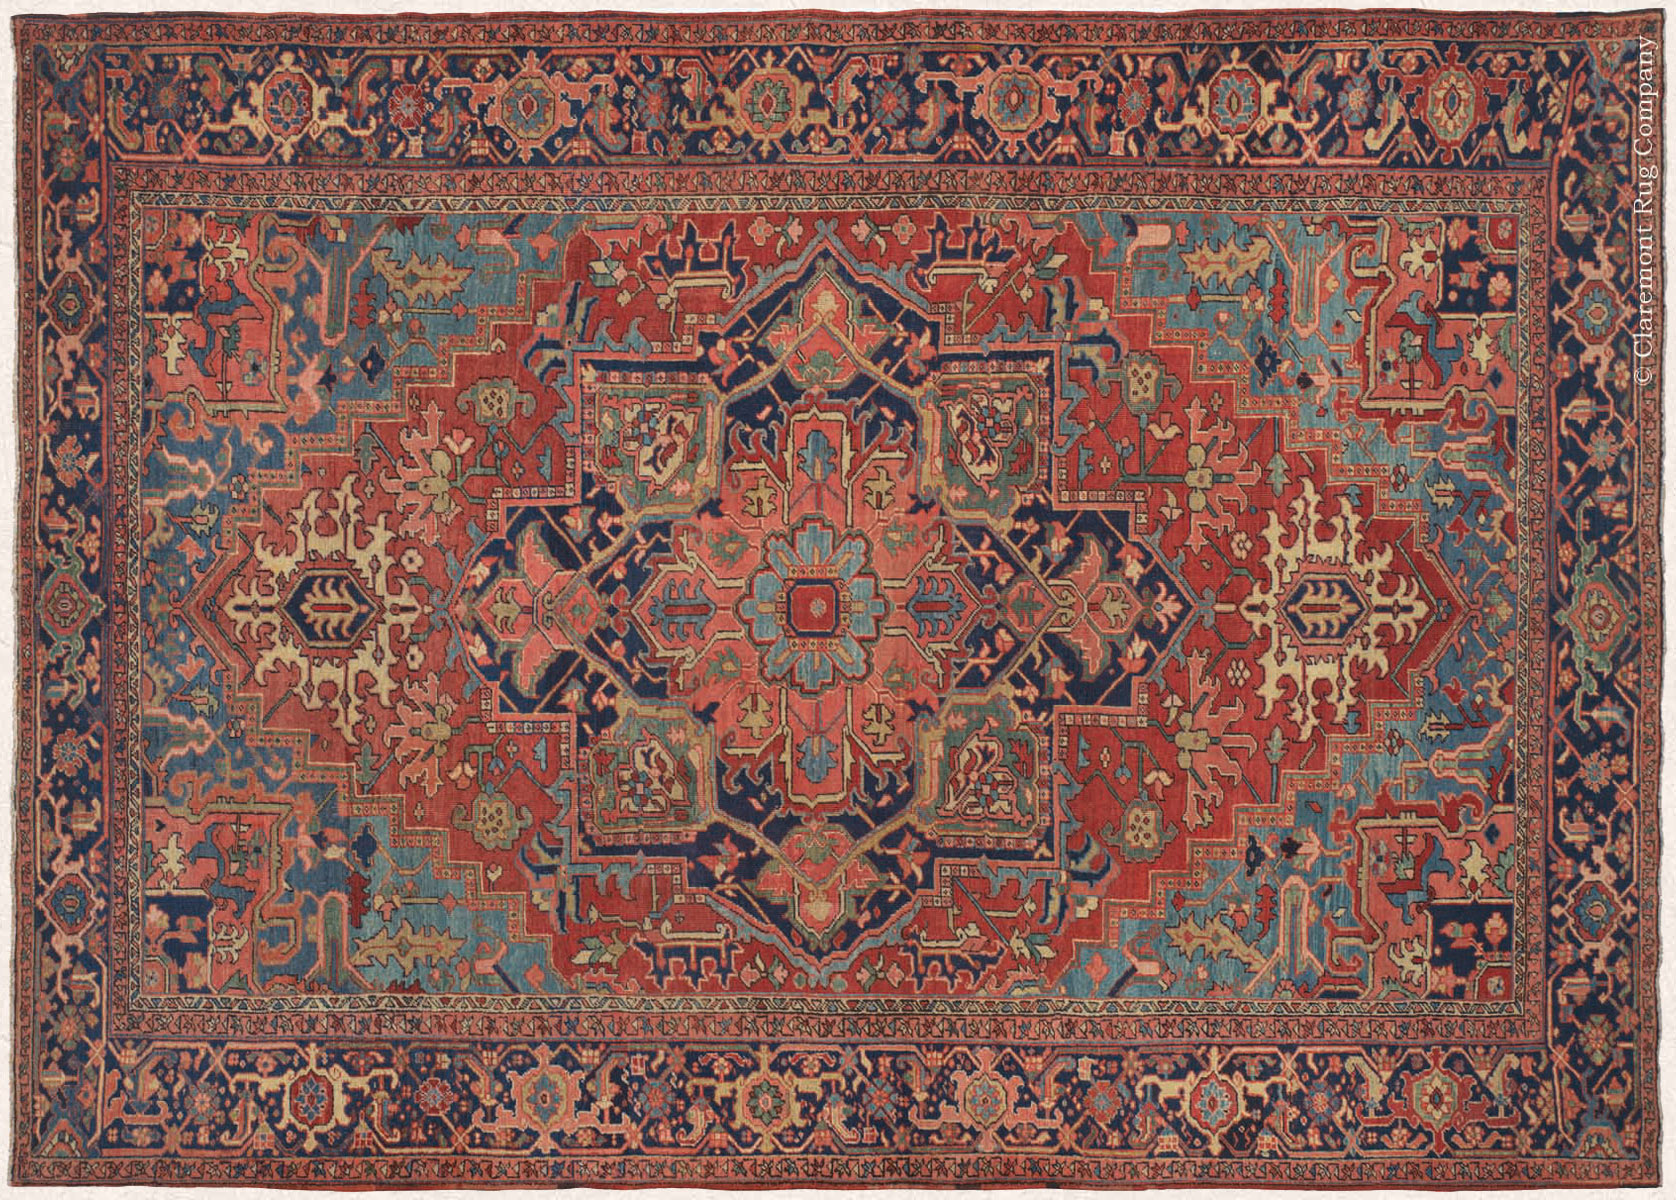  Heriz rug weavers often make them in geometric, bold patterns with a large medallion dominating the field. Such designs are traditional and often woven from memory.&nbsp;Similar rugs from the neighbouring towns and villages of the Heriz region are A